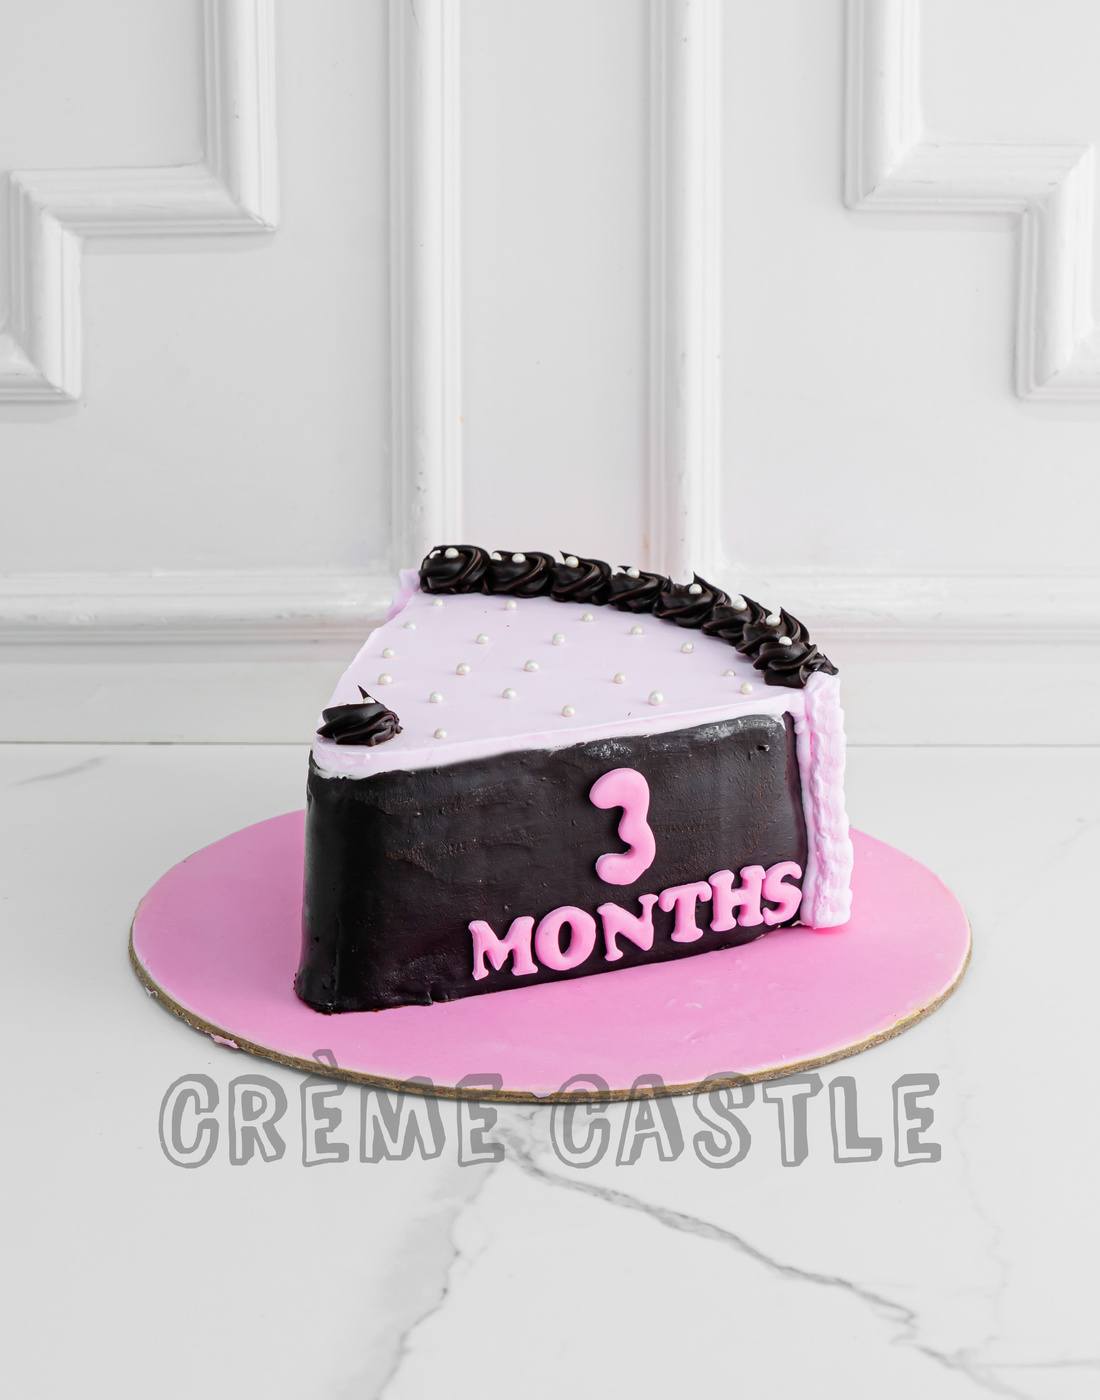 Little 3 month anniversary cake for a little boy - - CakesDecor